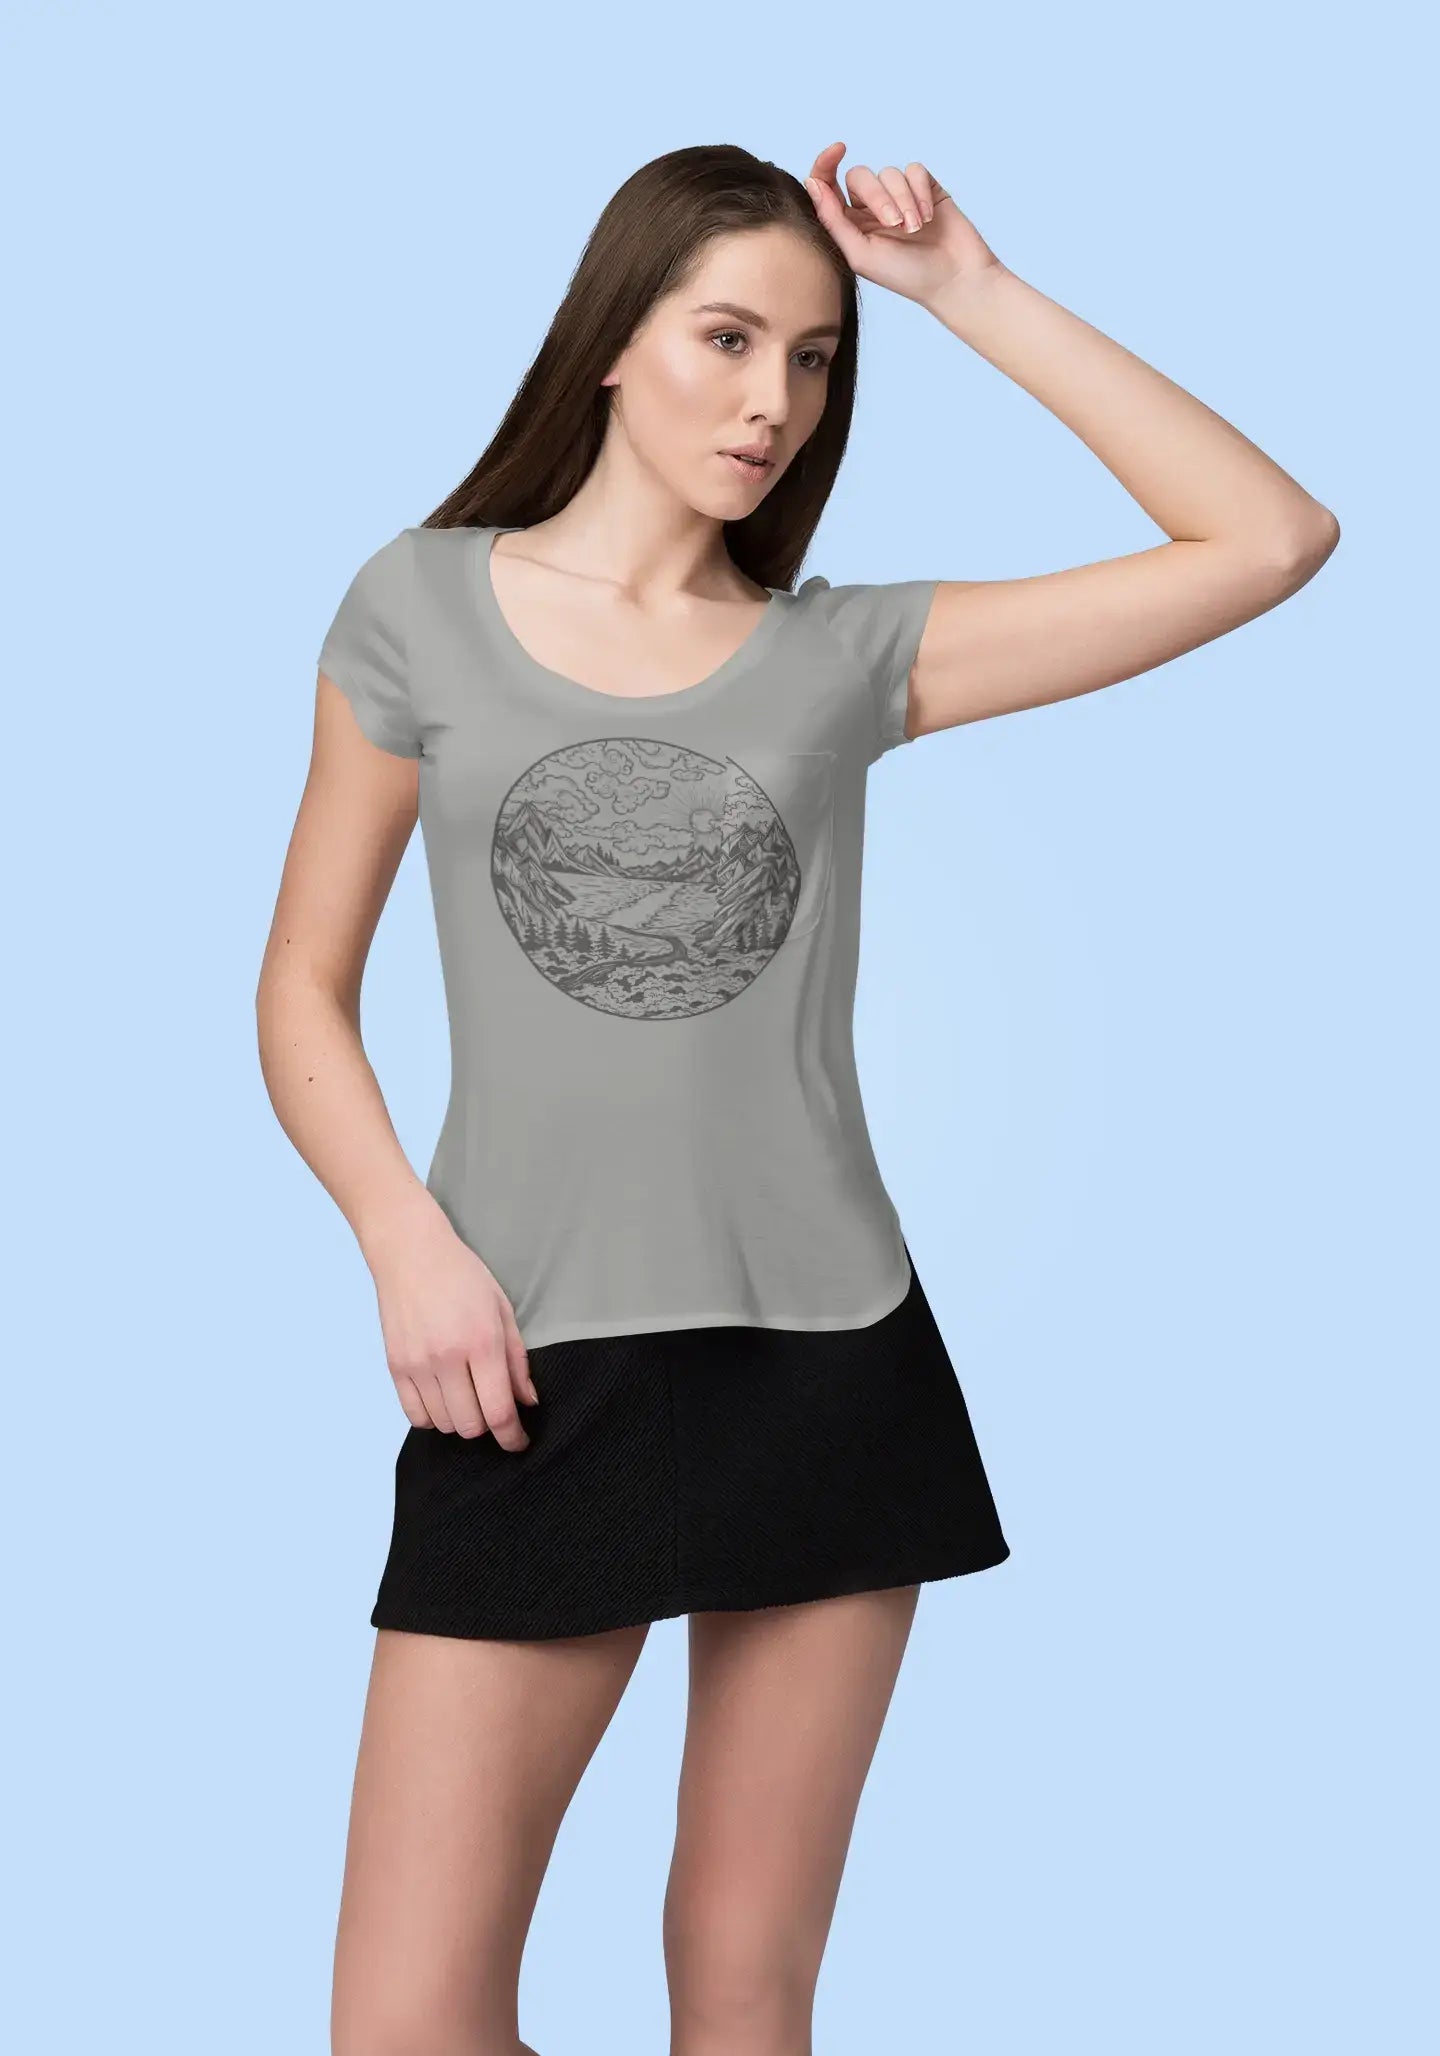 ULTRABASIC - Graphic Printed Women's River Mountain and Forest T-Shirt Grey Marl